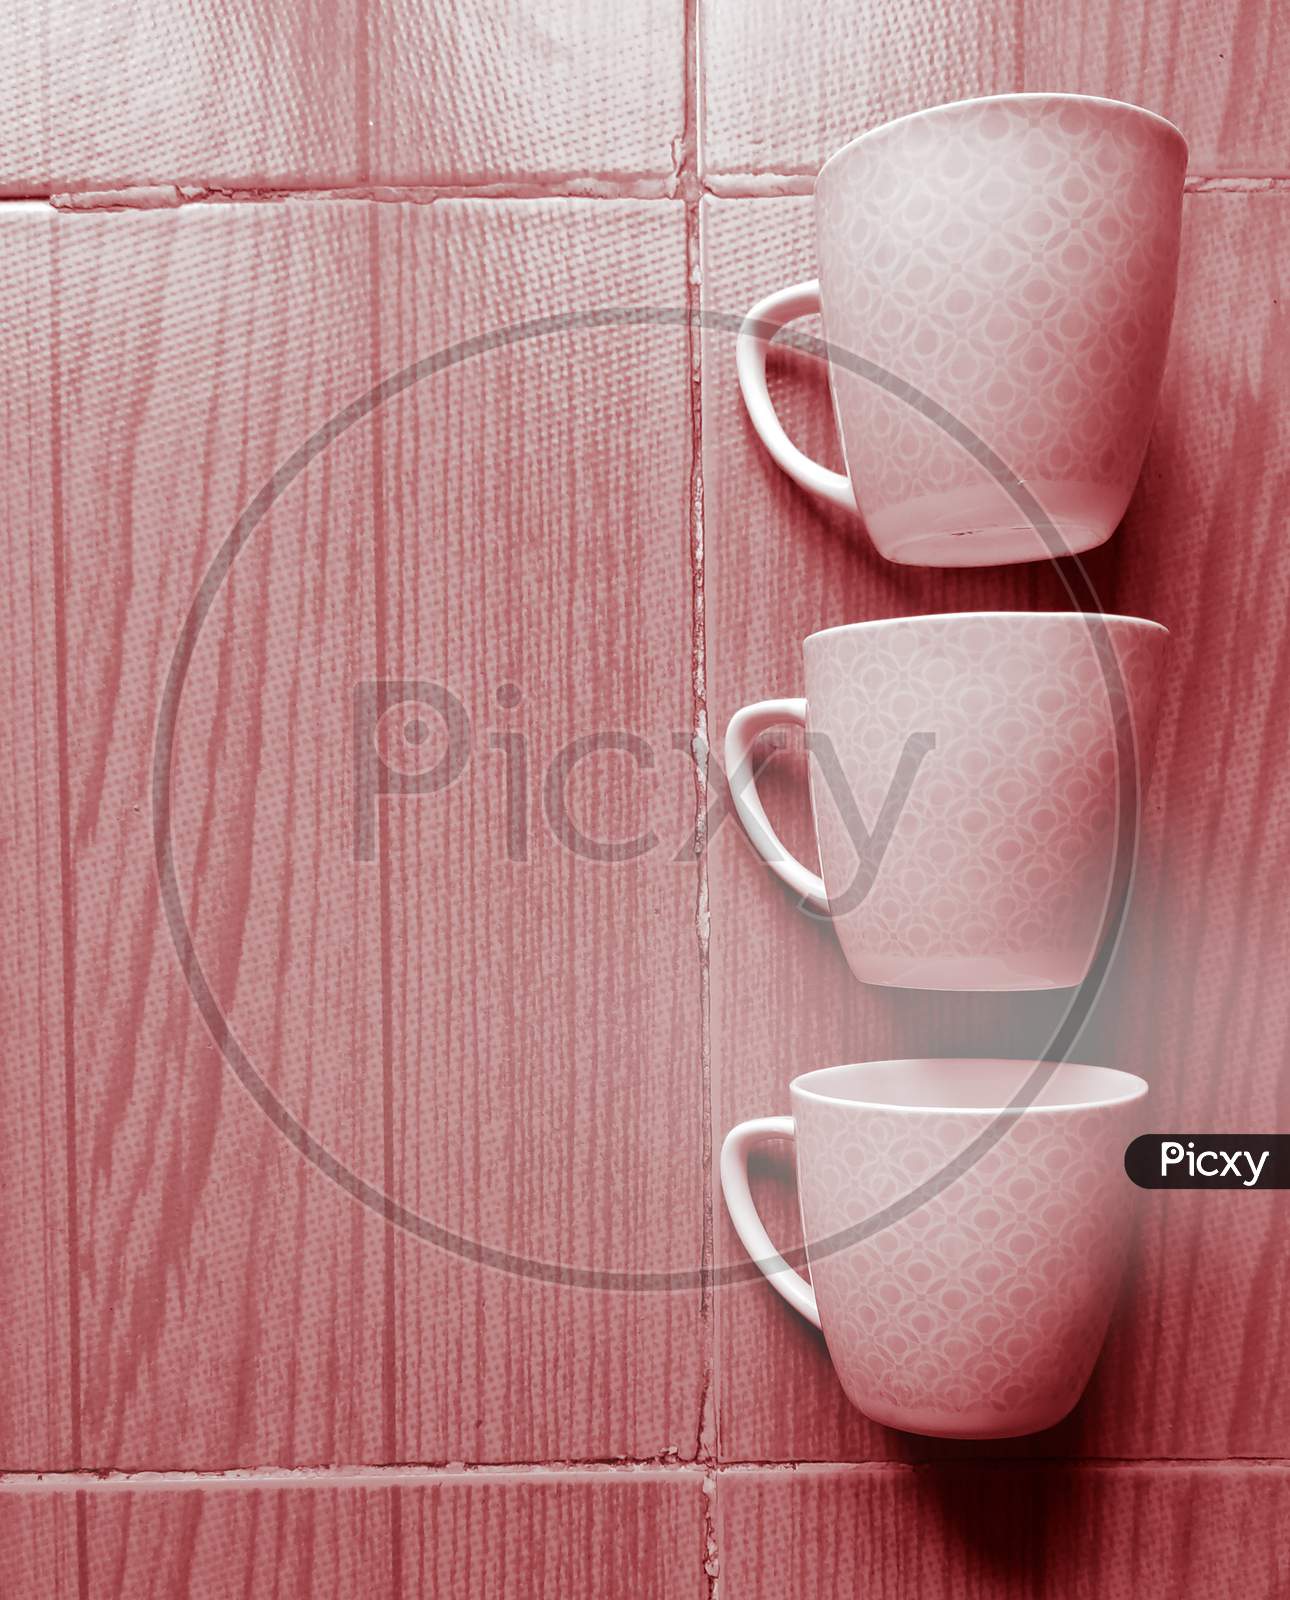 Three coffee mugs arranged in a creative way to make a wallpaper or background with adequate space for text.